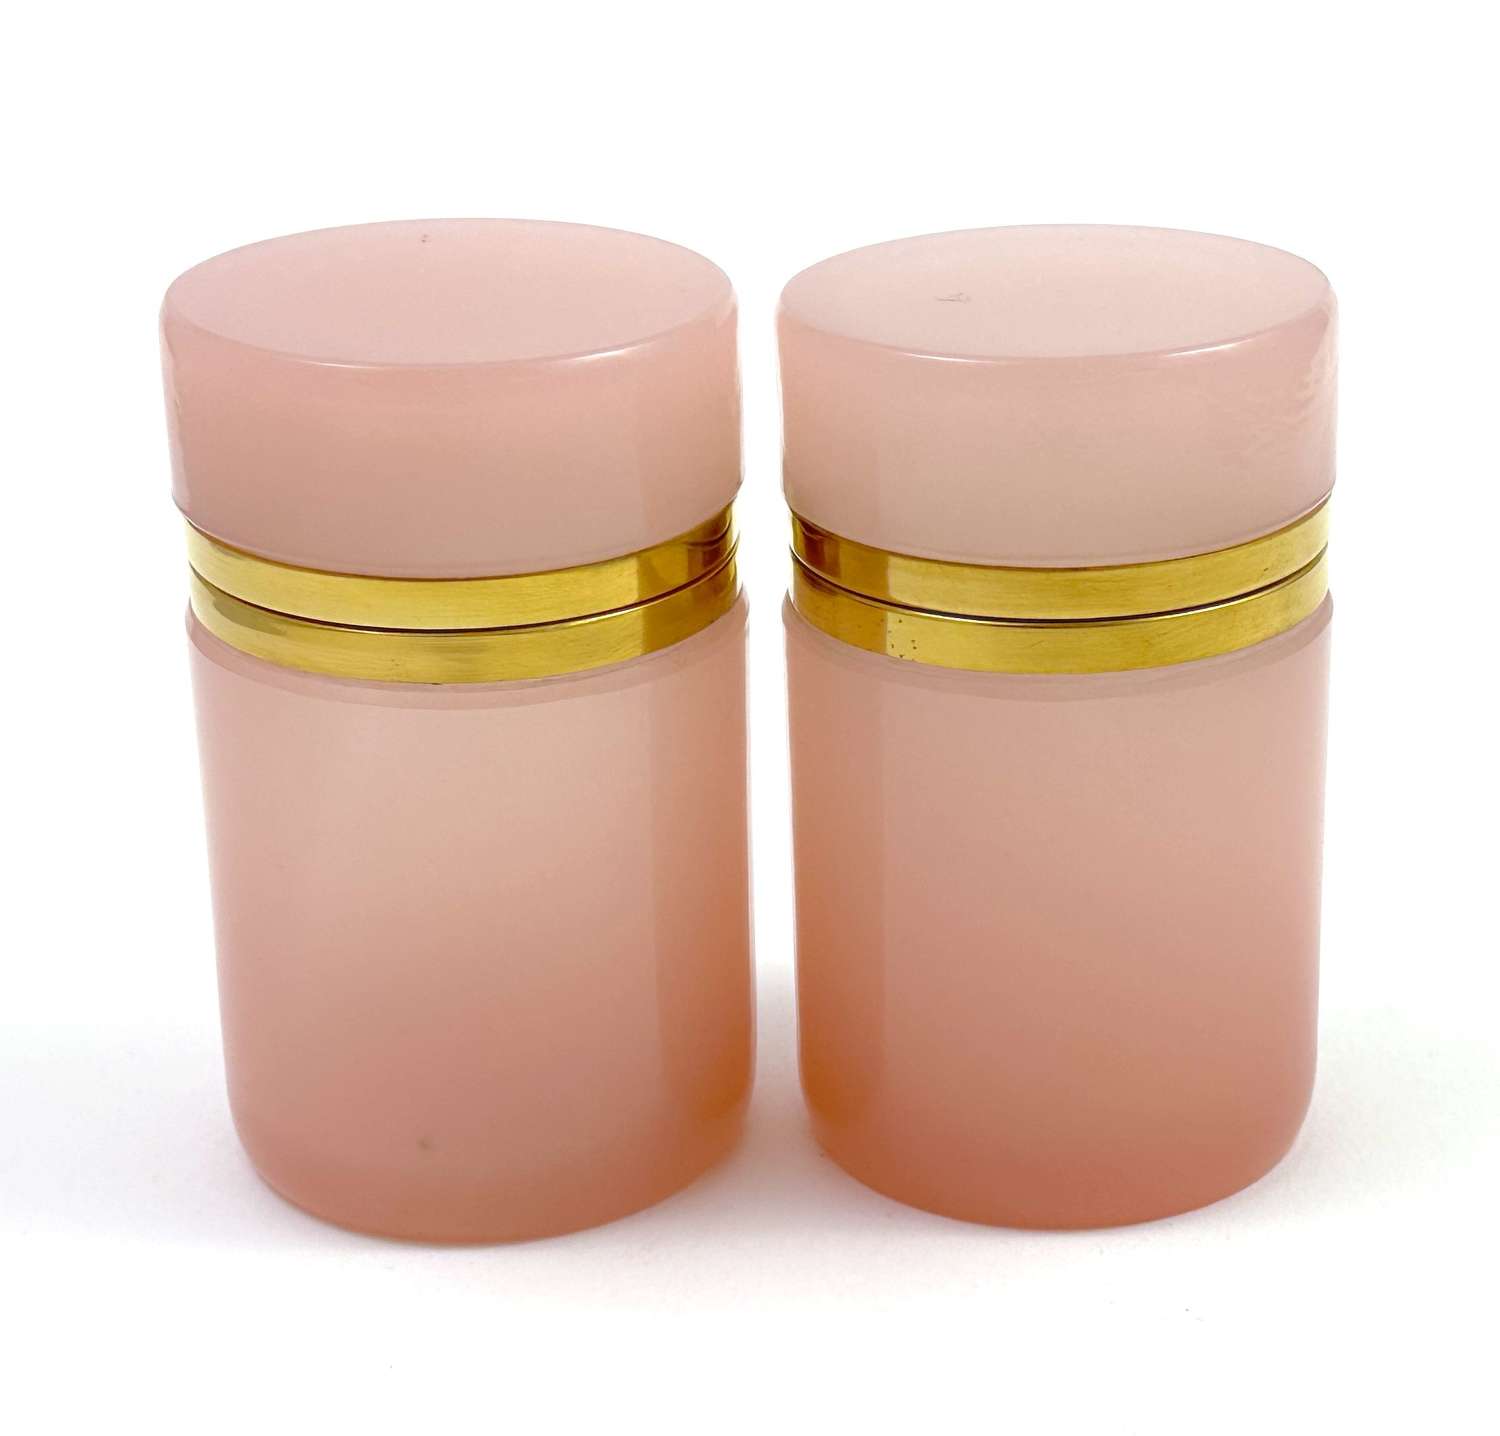 Pair of Antique Pale Pink Opaline Glass Cylindrical Caskets